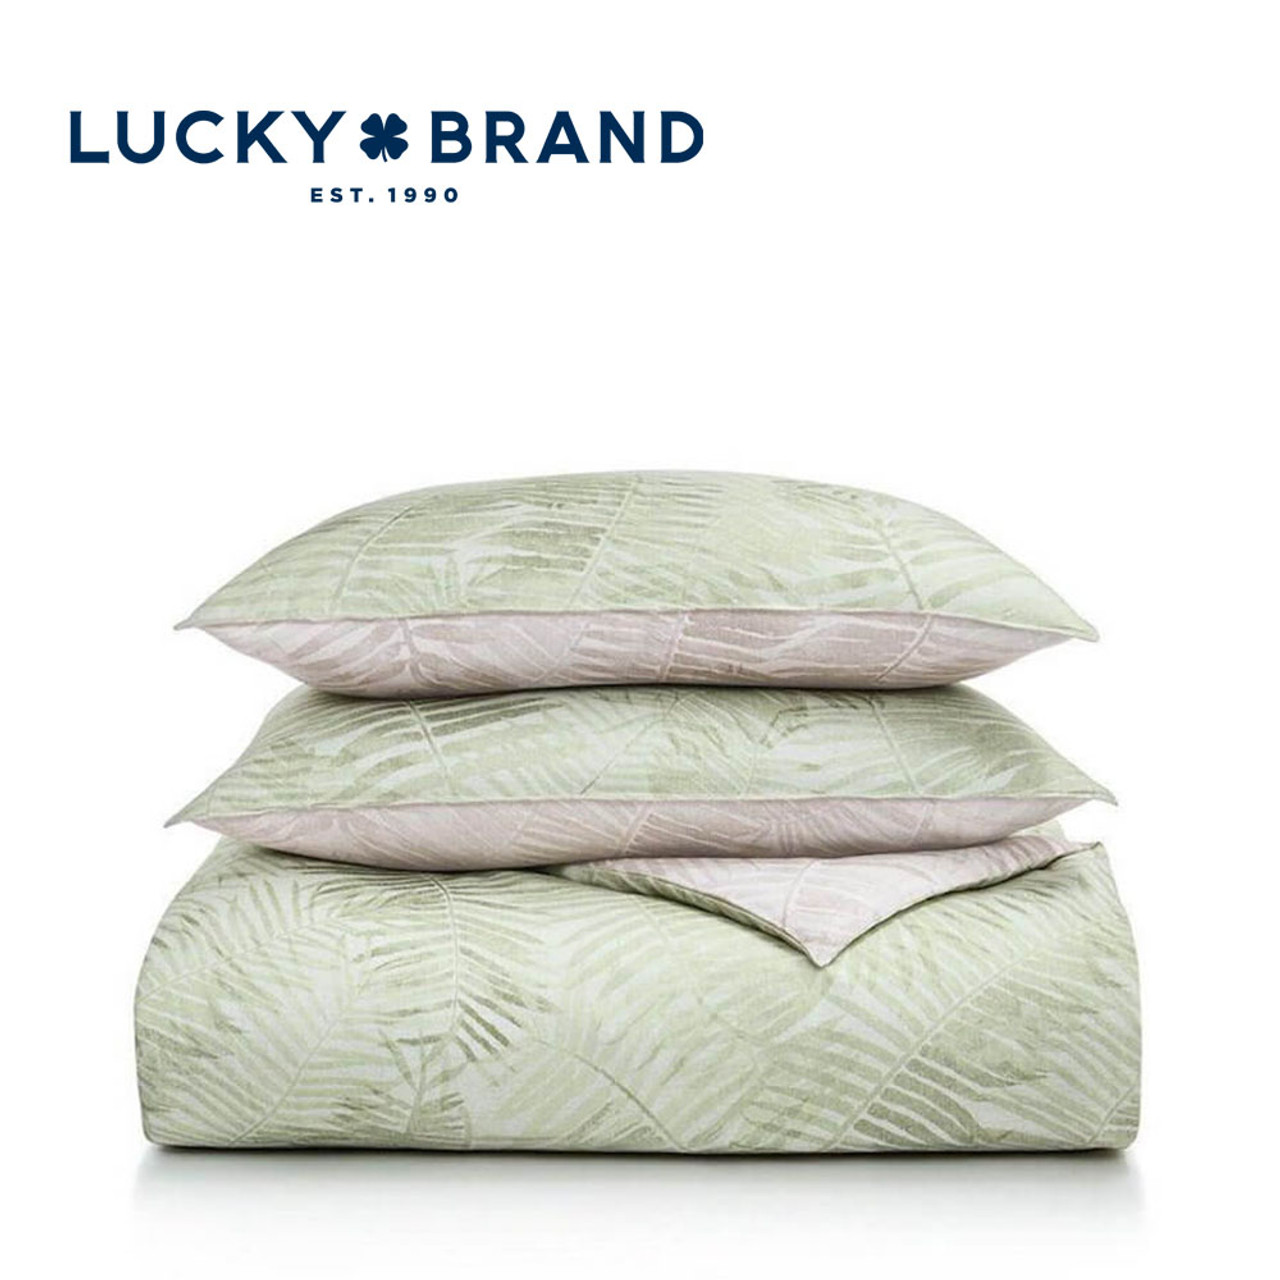 Lucky Brand Paradise 230-Thread Count Cotton 3-Piece King Duvet Set product image